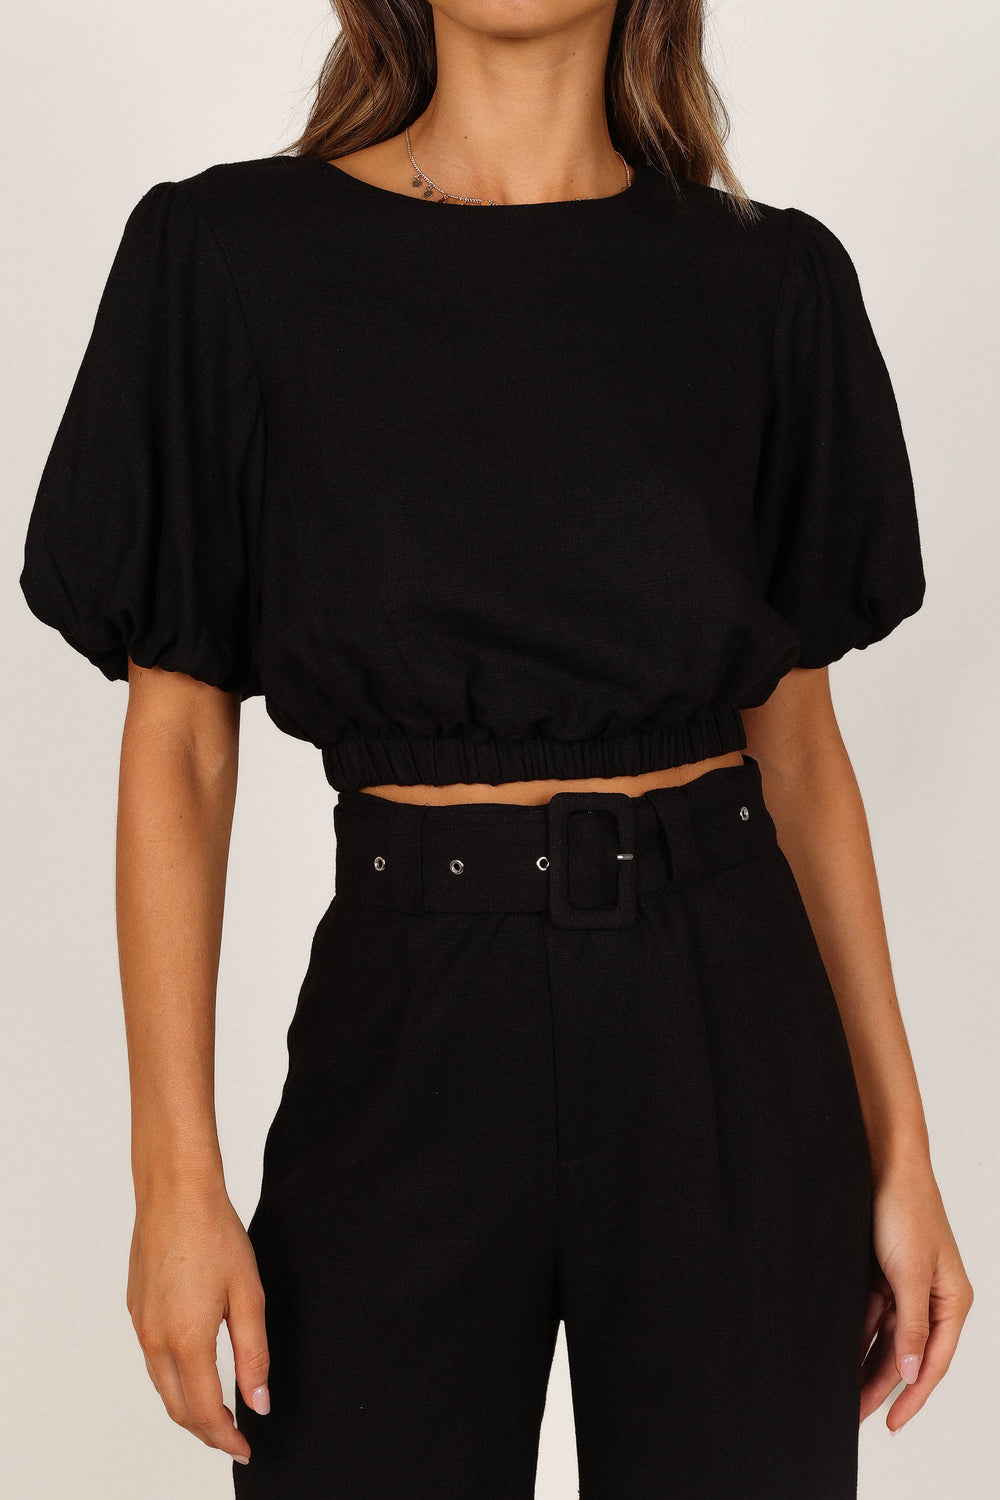 Melbourne Two Piece Set - Twill Two Piece Short Set in Black